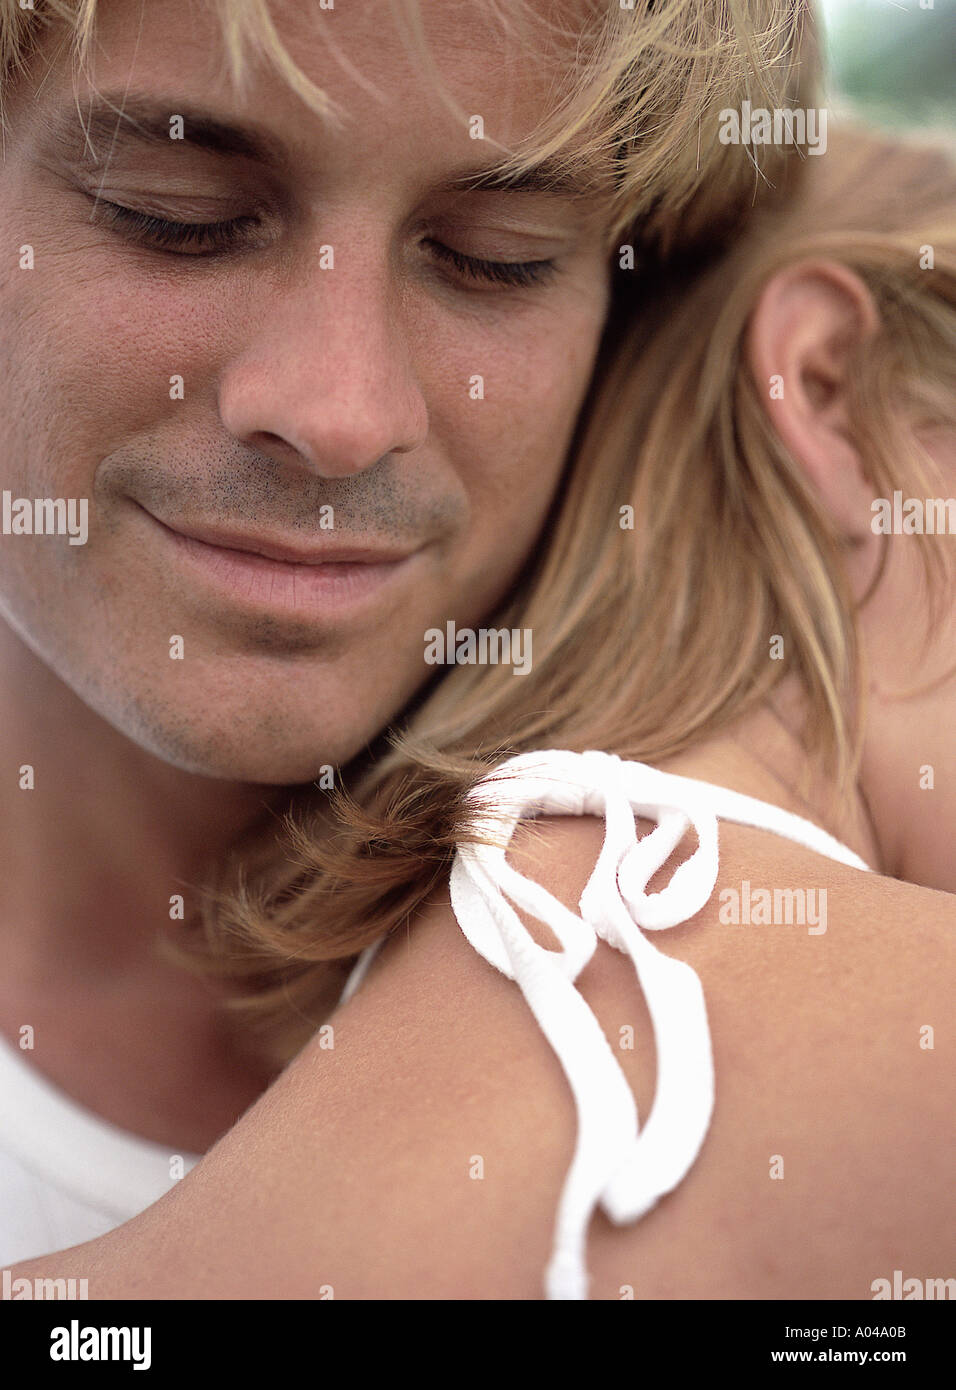 Young couple resting their heads together in an intimate embrace Stock Photo